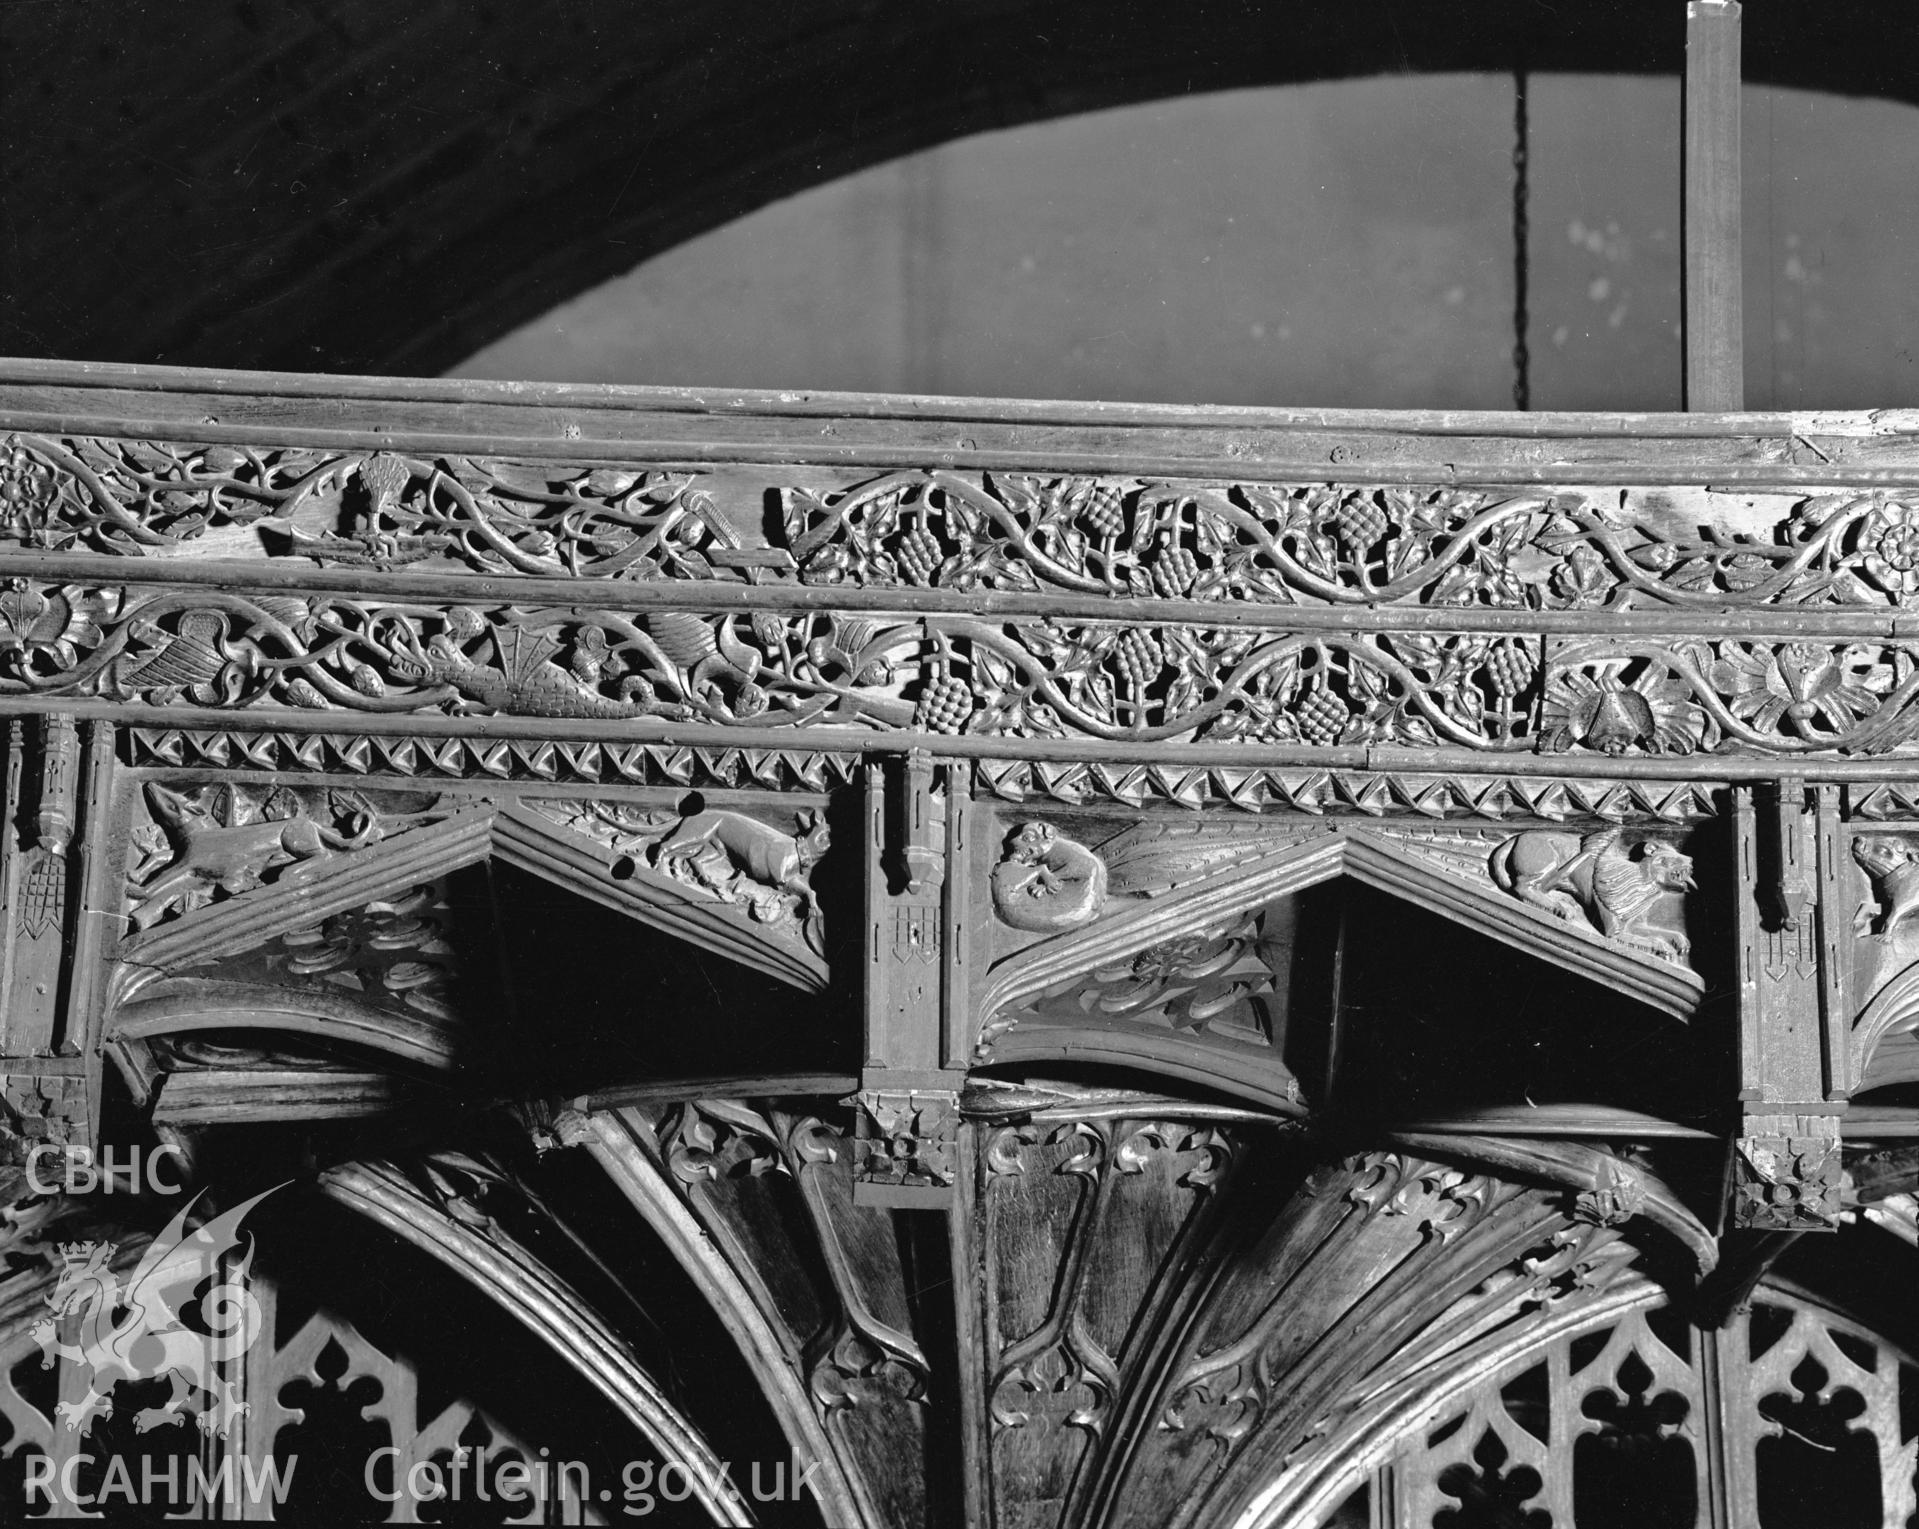 Interior view of St Marys Church Conwy showing screen detail, taken in 10.09.1951.